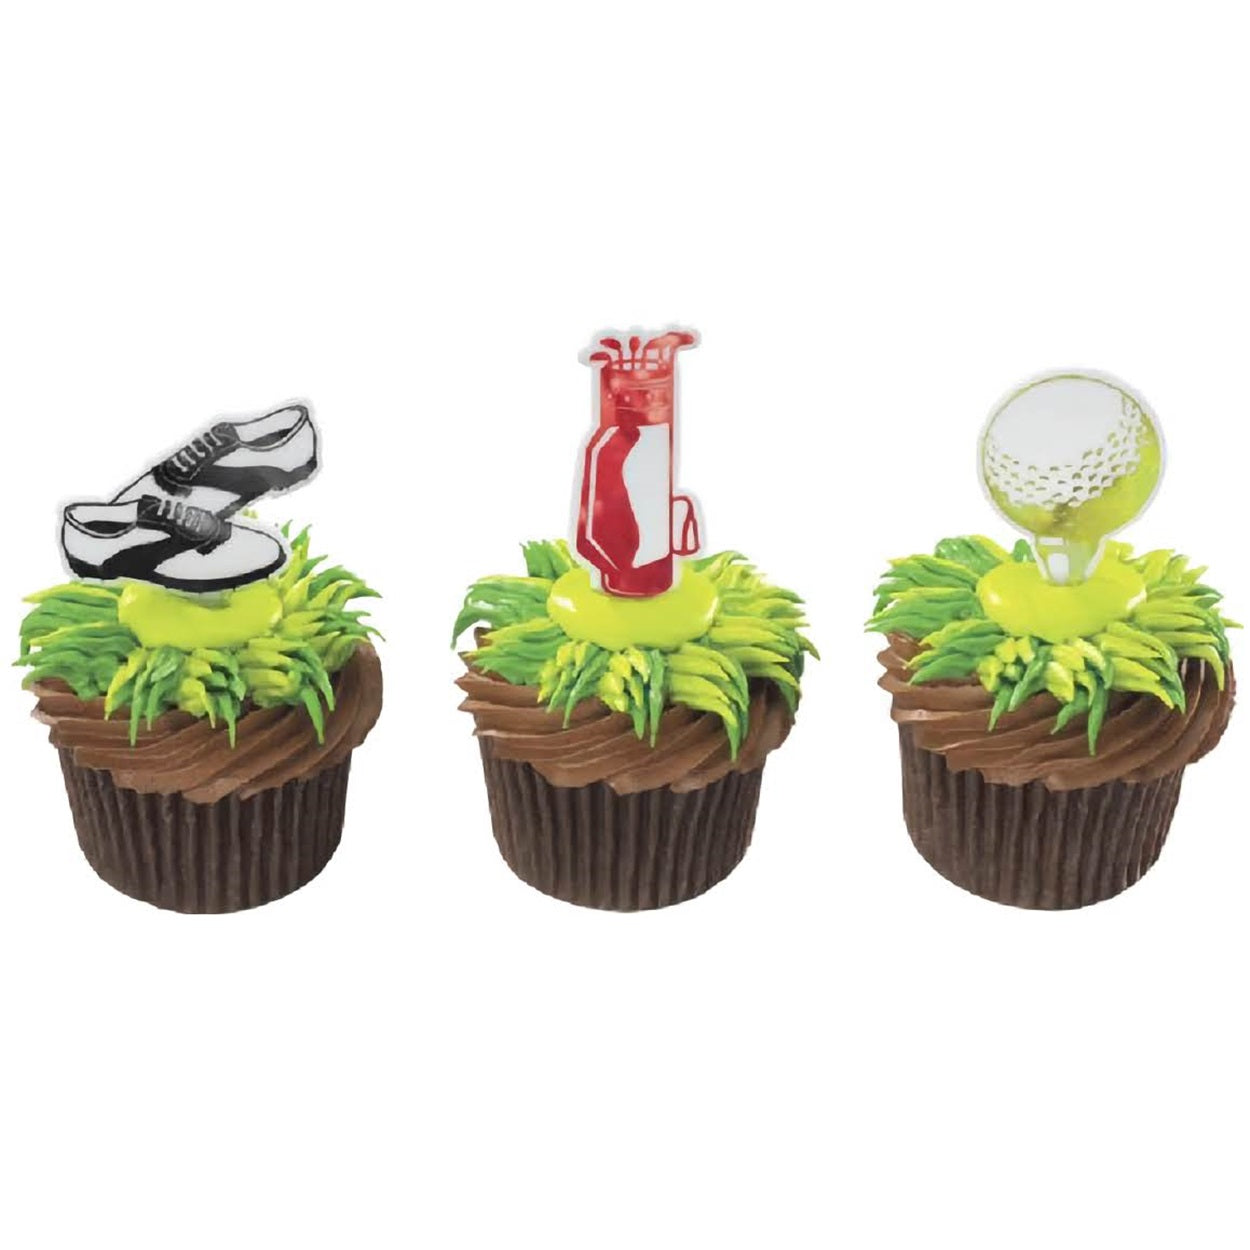 Golf assortment cupcake picks, twelve-pack, with detailed golf bags, shoes, and balls, suitable for adding a sporty touch to cupcakes and treats.